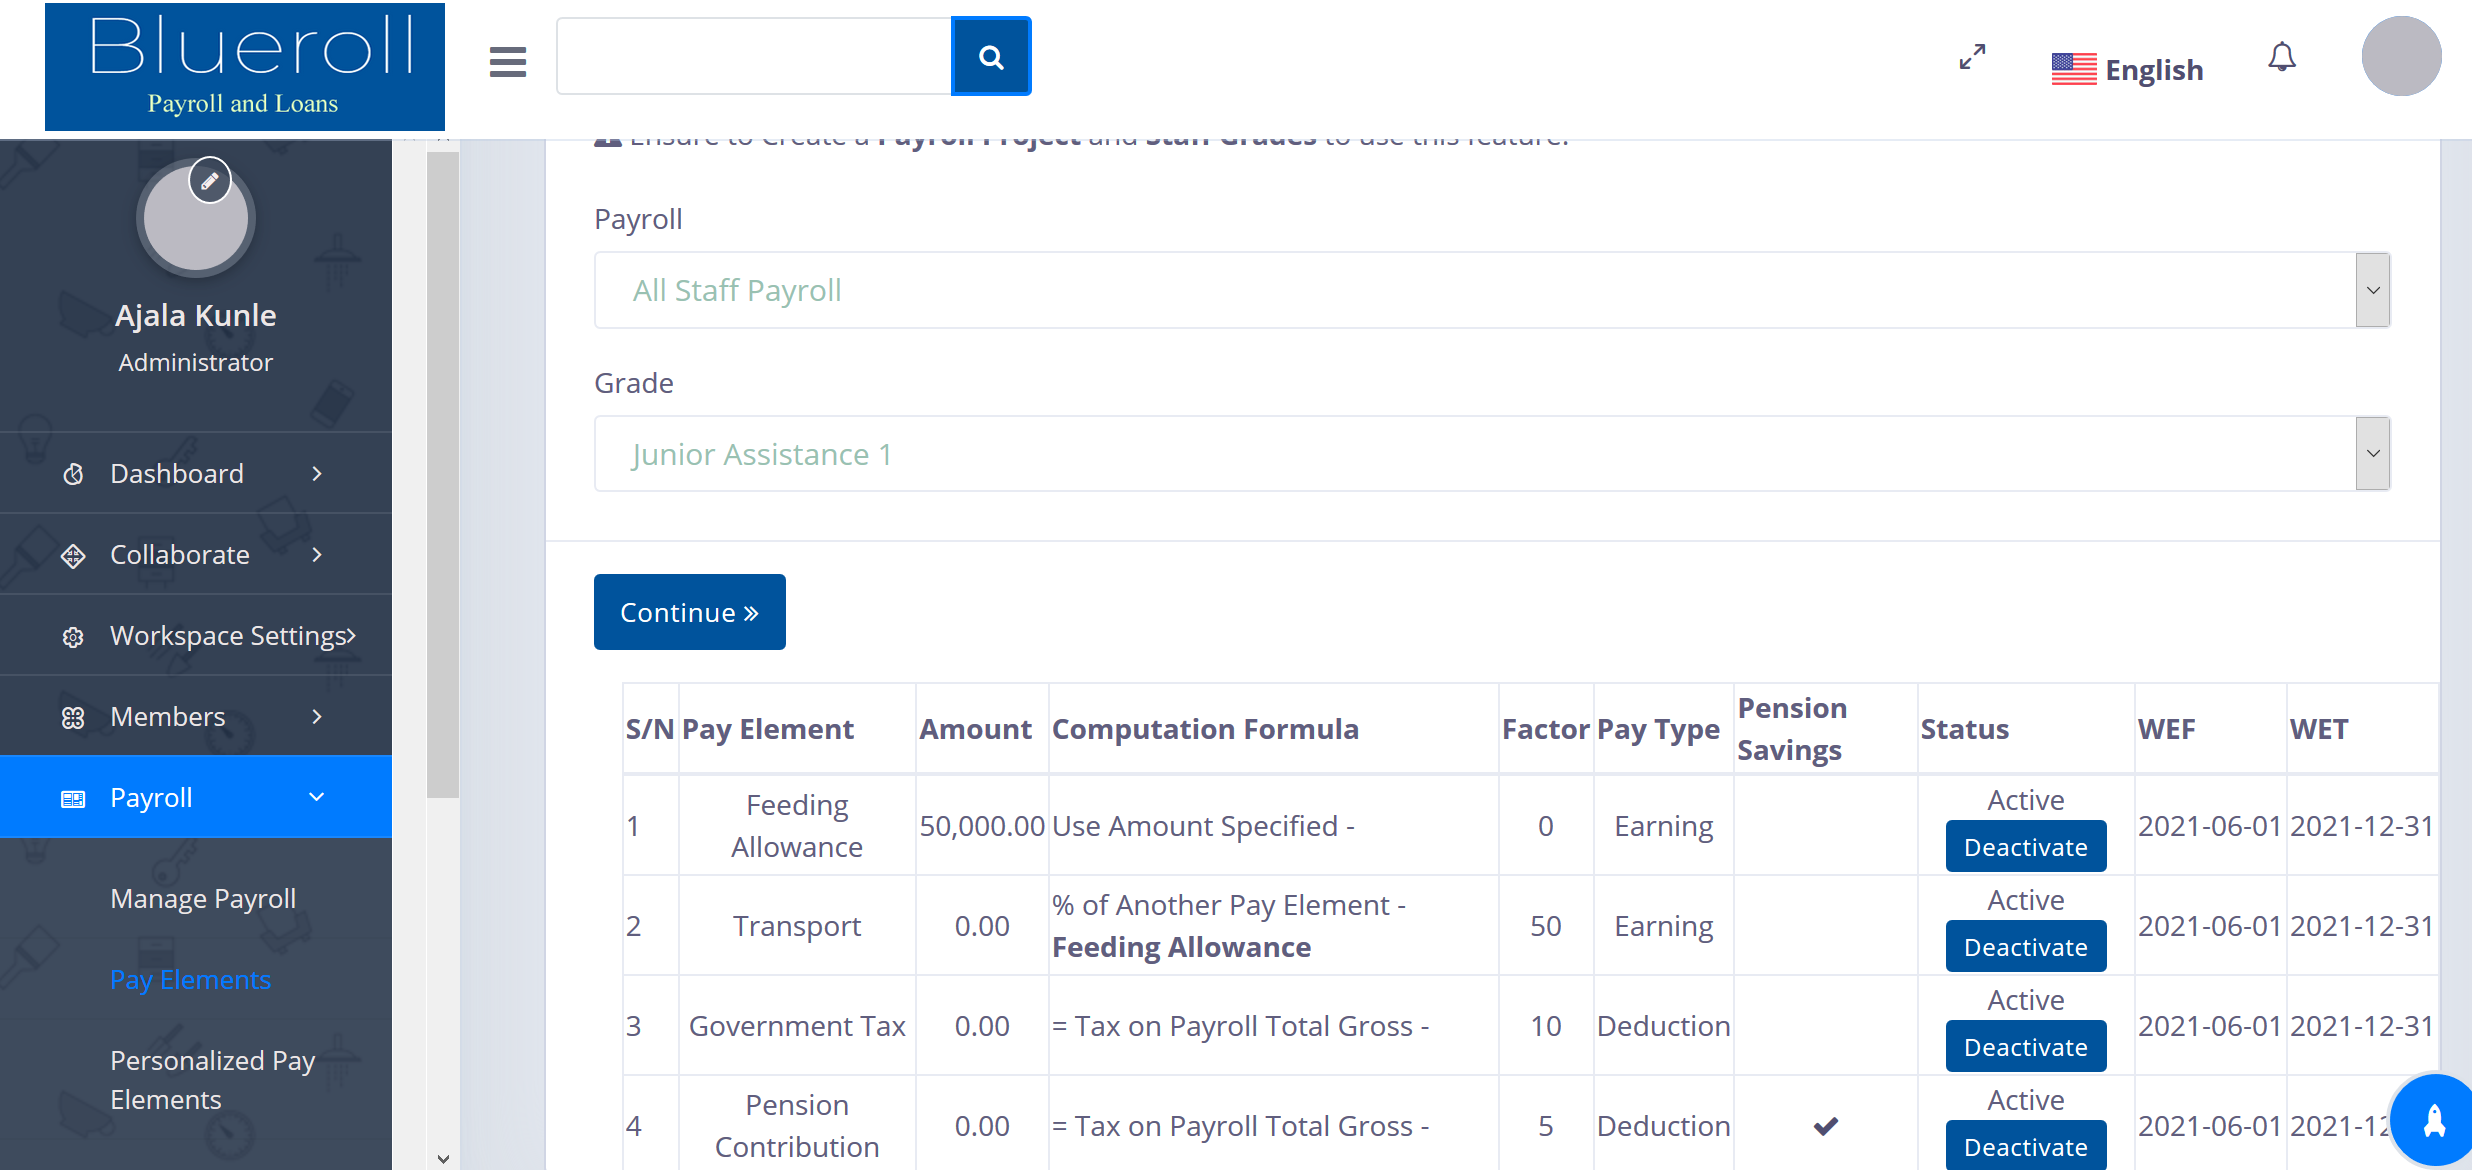 Blueroll Payroll and Loan Management System